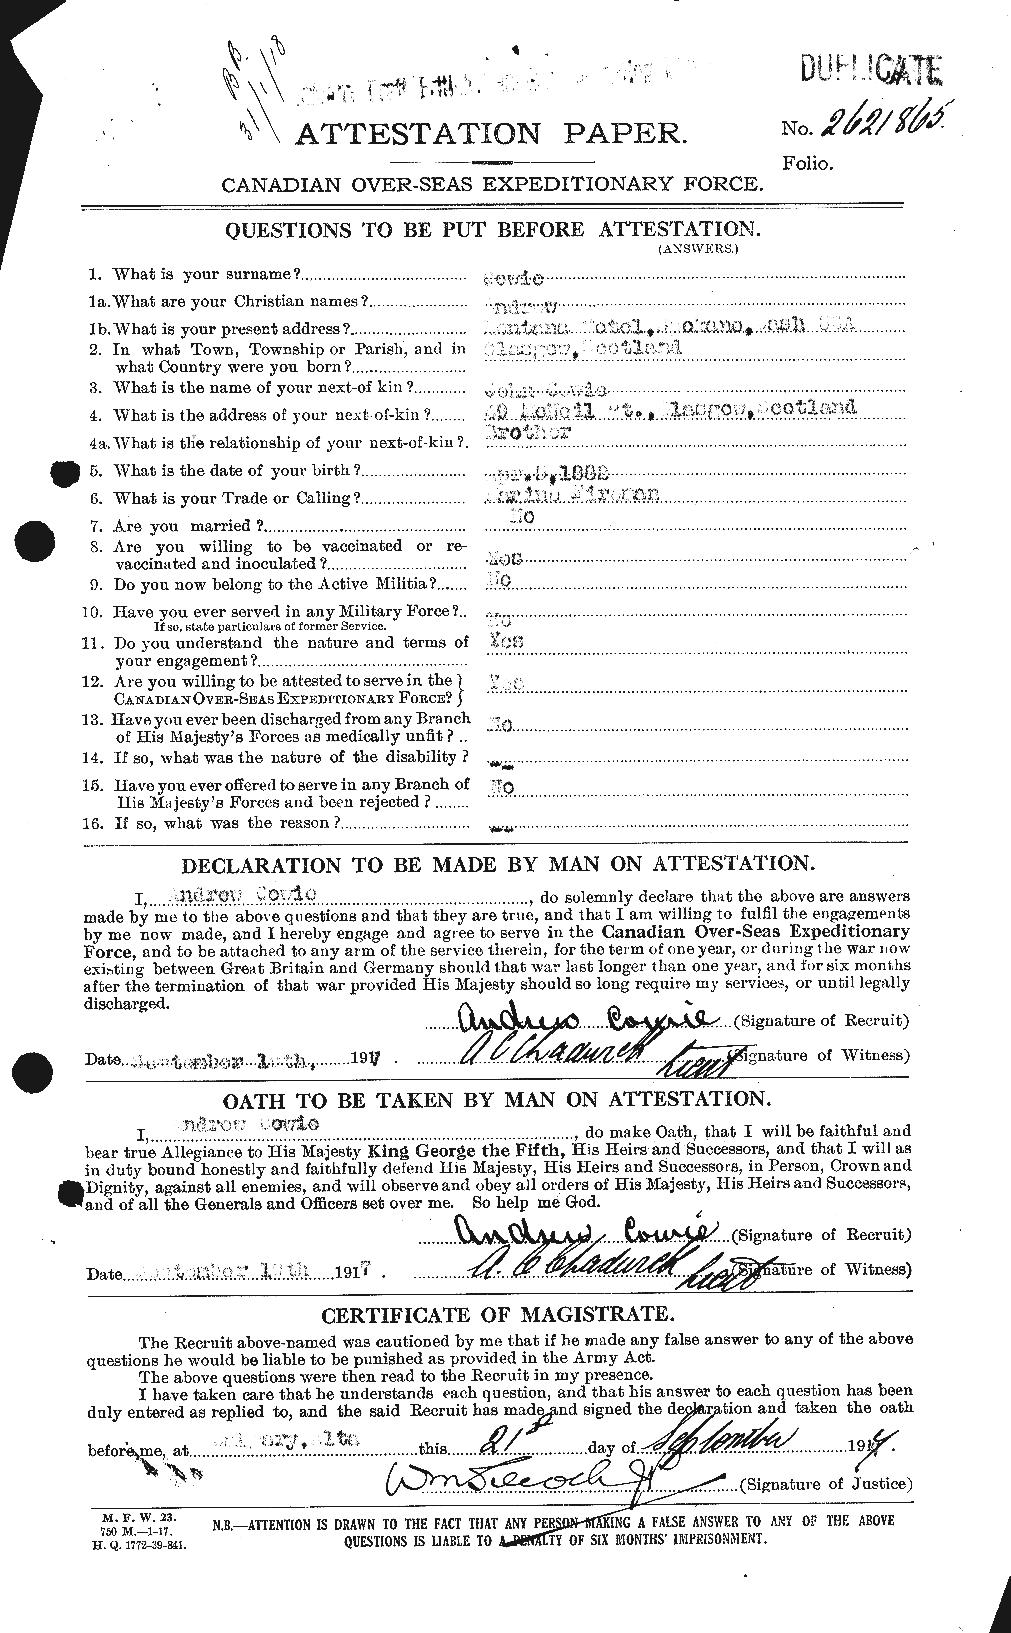 Personnel Records of the First World War - CEF 060038a